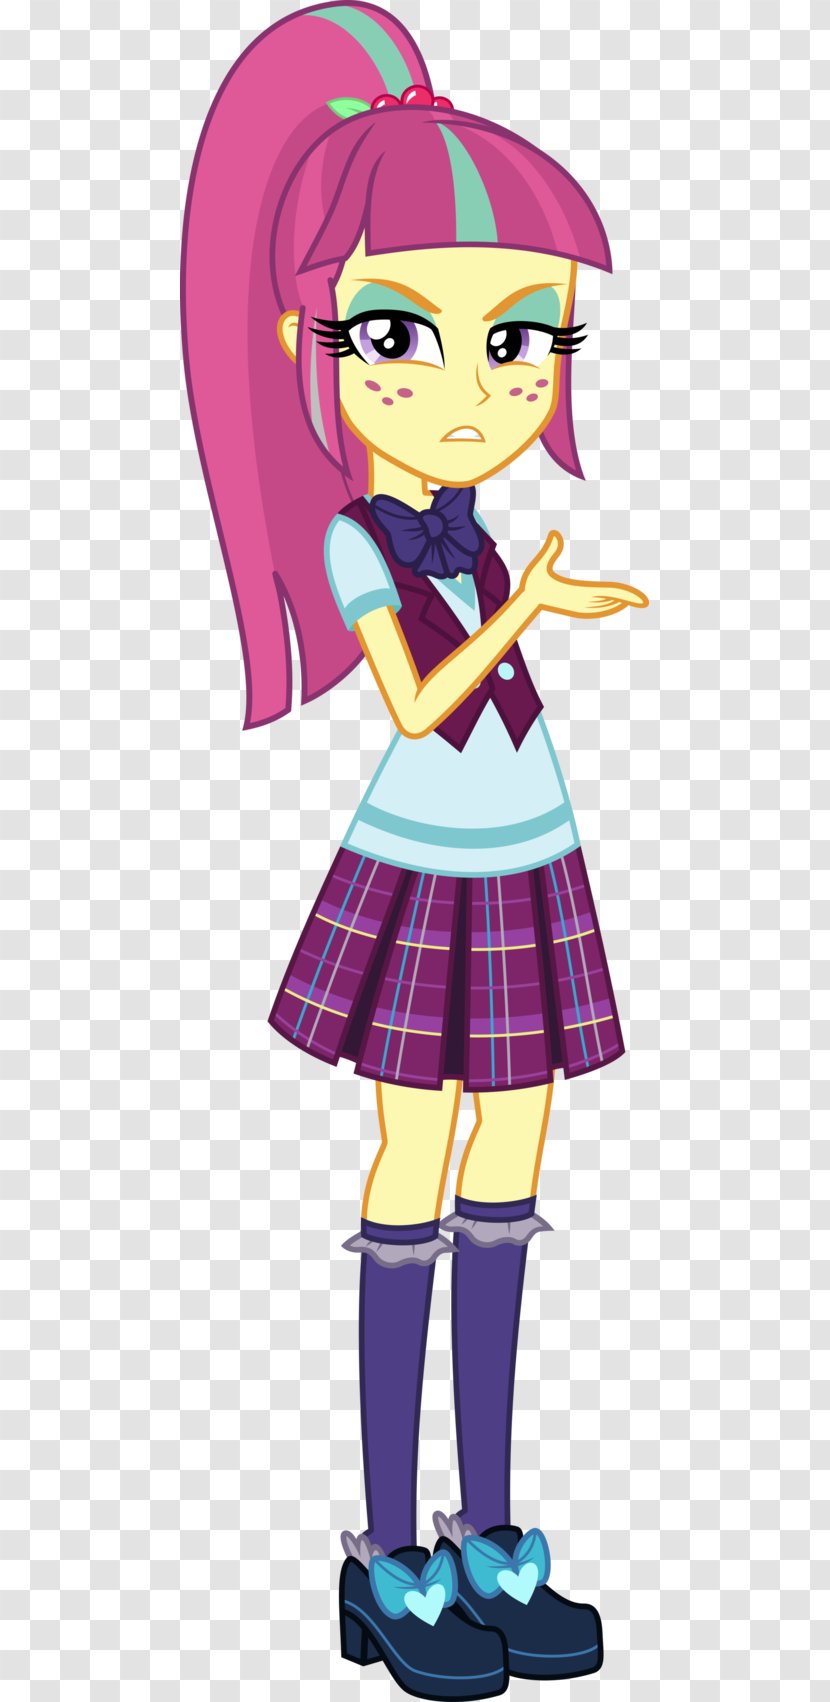 Sour Sweet My Little Pony: Equestria Girls Rarity Twilight Sparkle - Watercolor - SWEET AND SOUR Transparent PNG